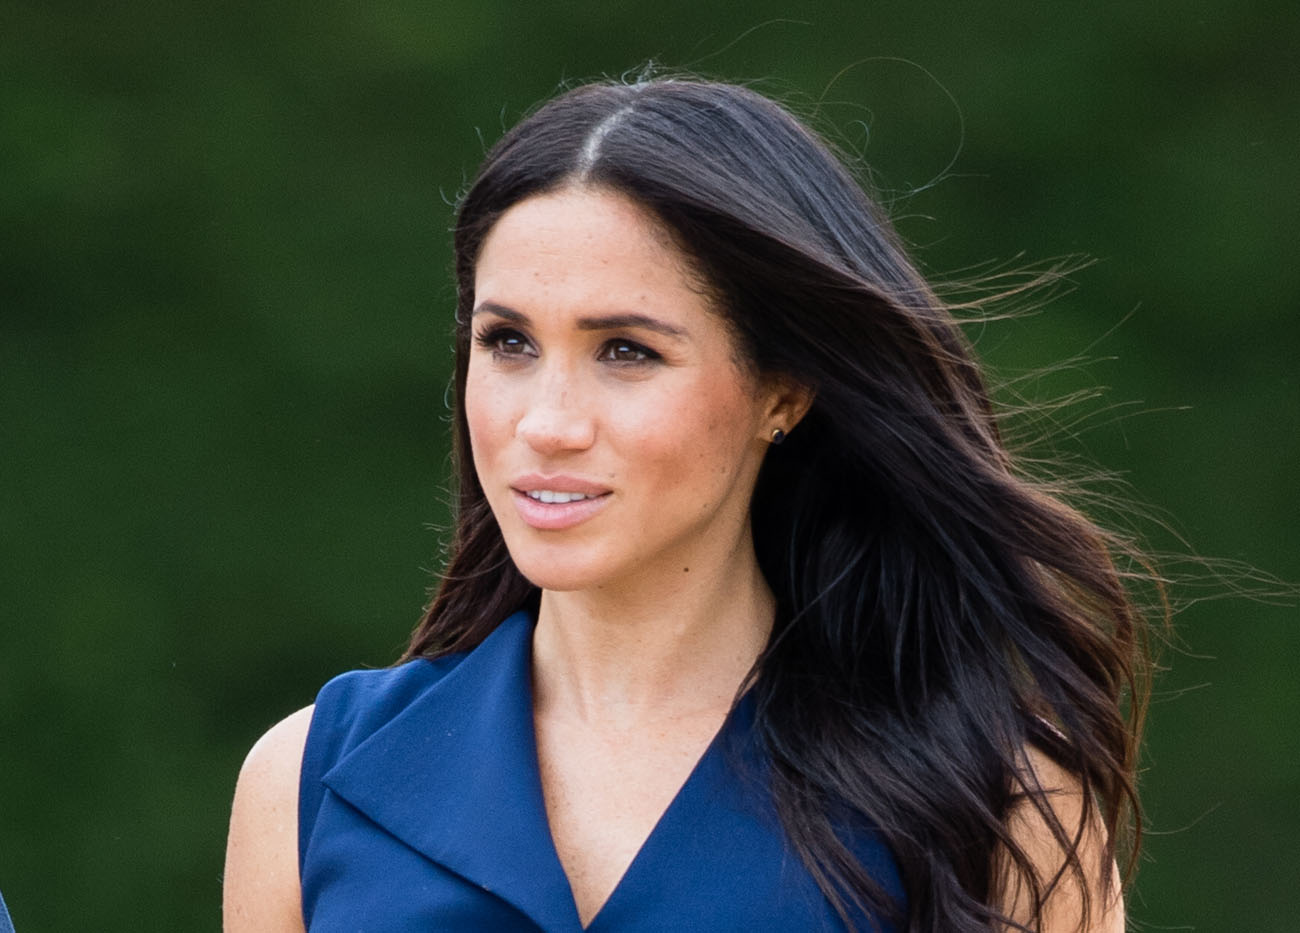 Why Meghan Markle Had to Meet a 'Terrorist' Before Joining the Royal Family